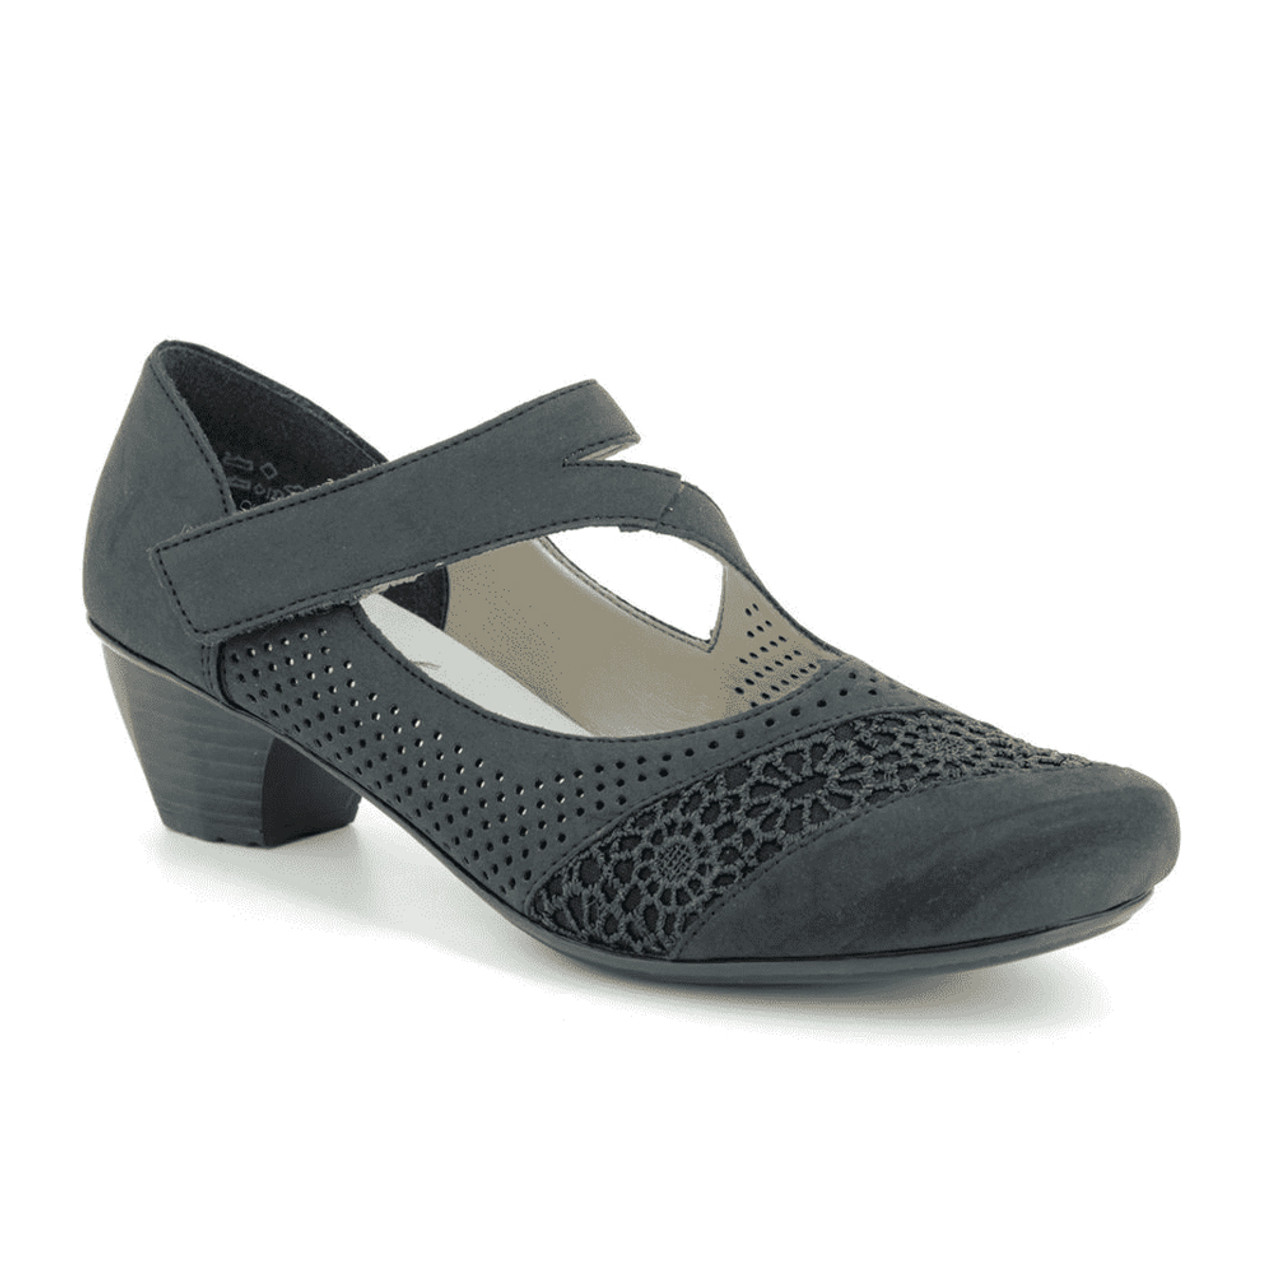 rieker ladies mary jane shoes